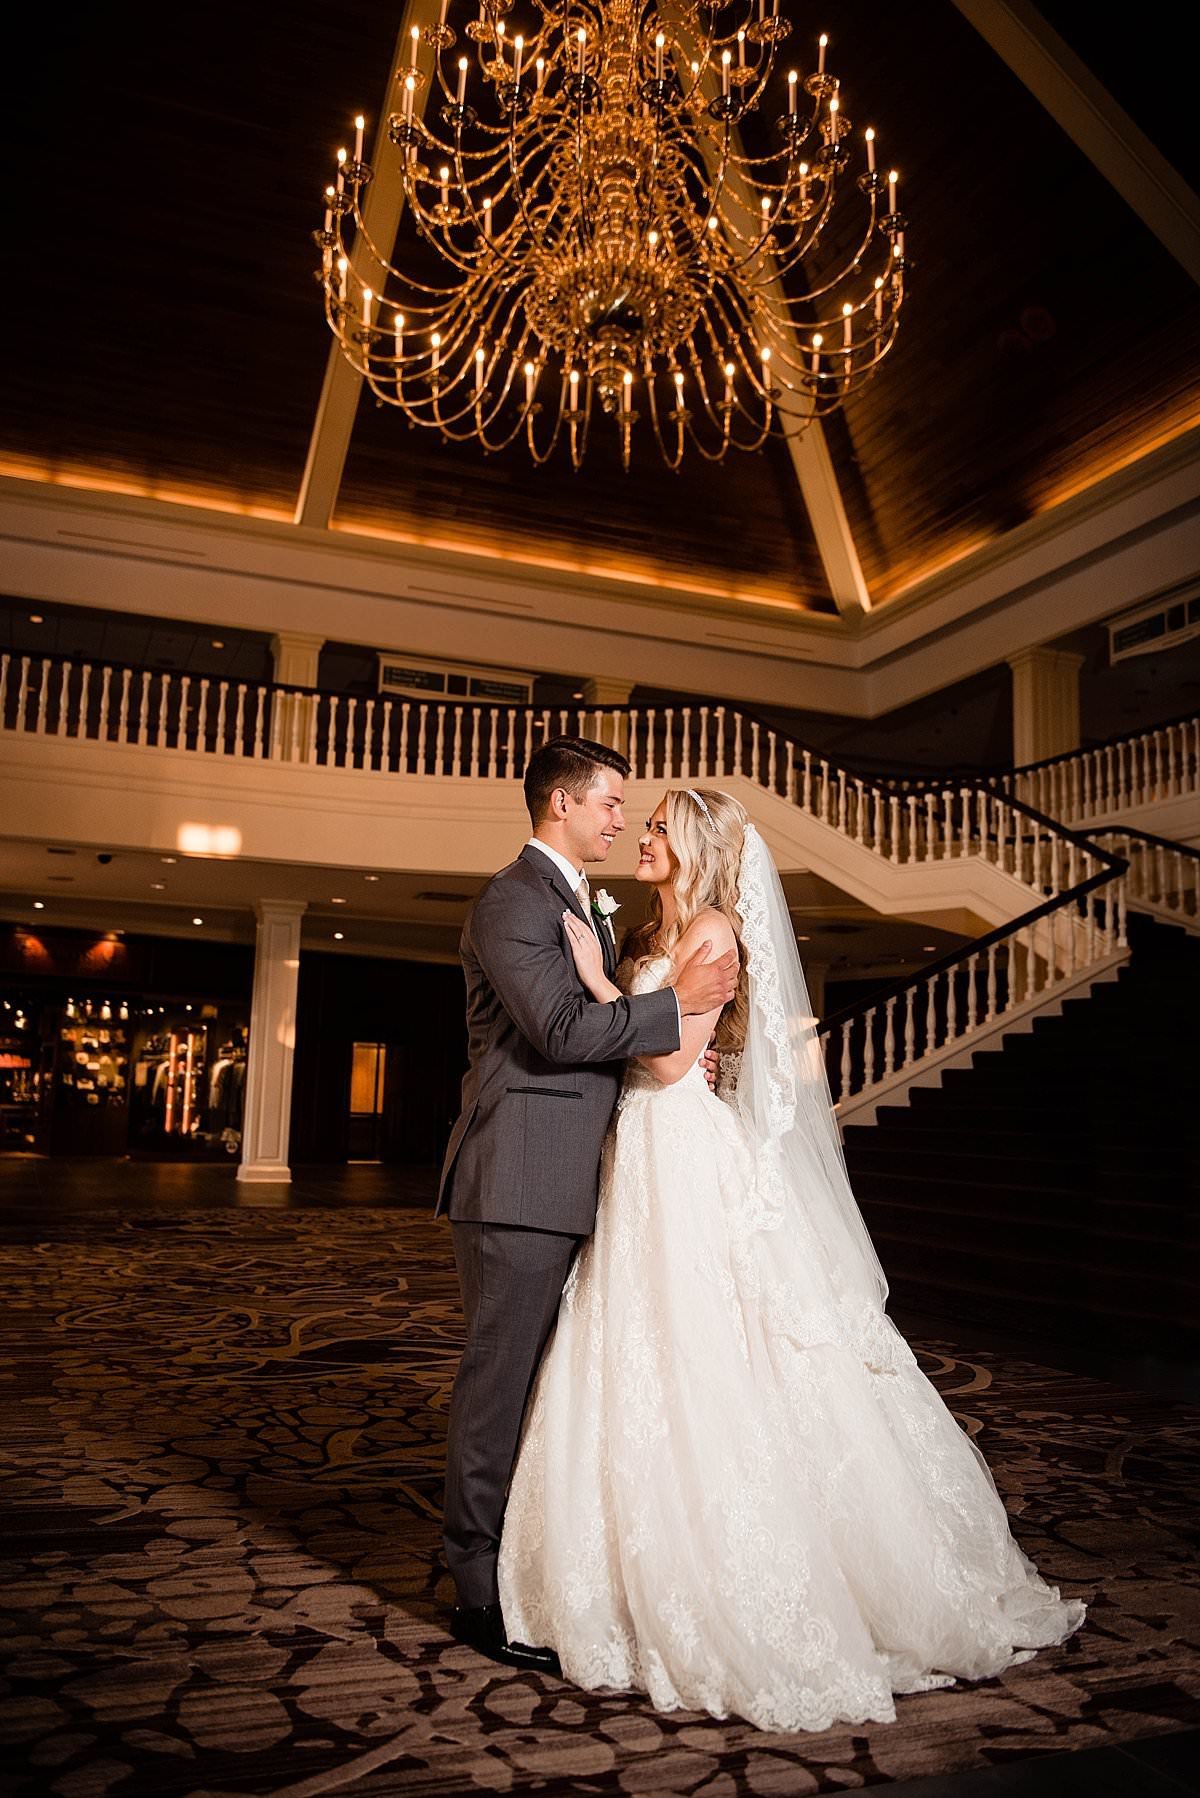 Couple slow dancing under chandelier inside of the lobby with a staircase behind them